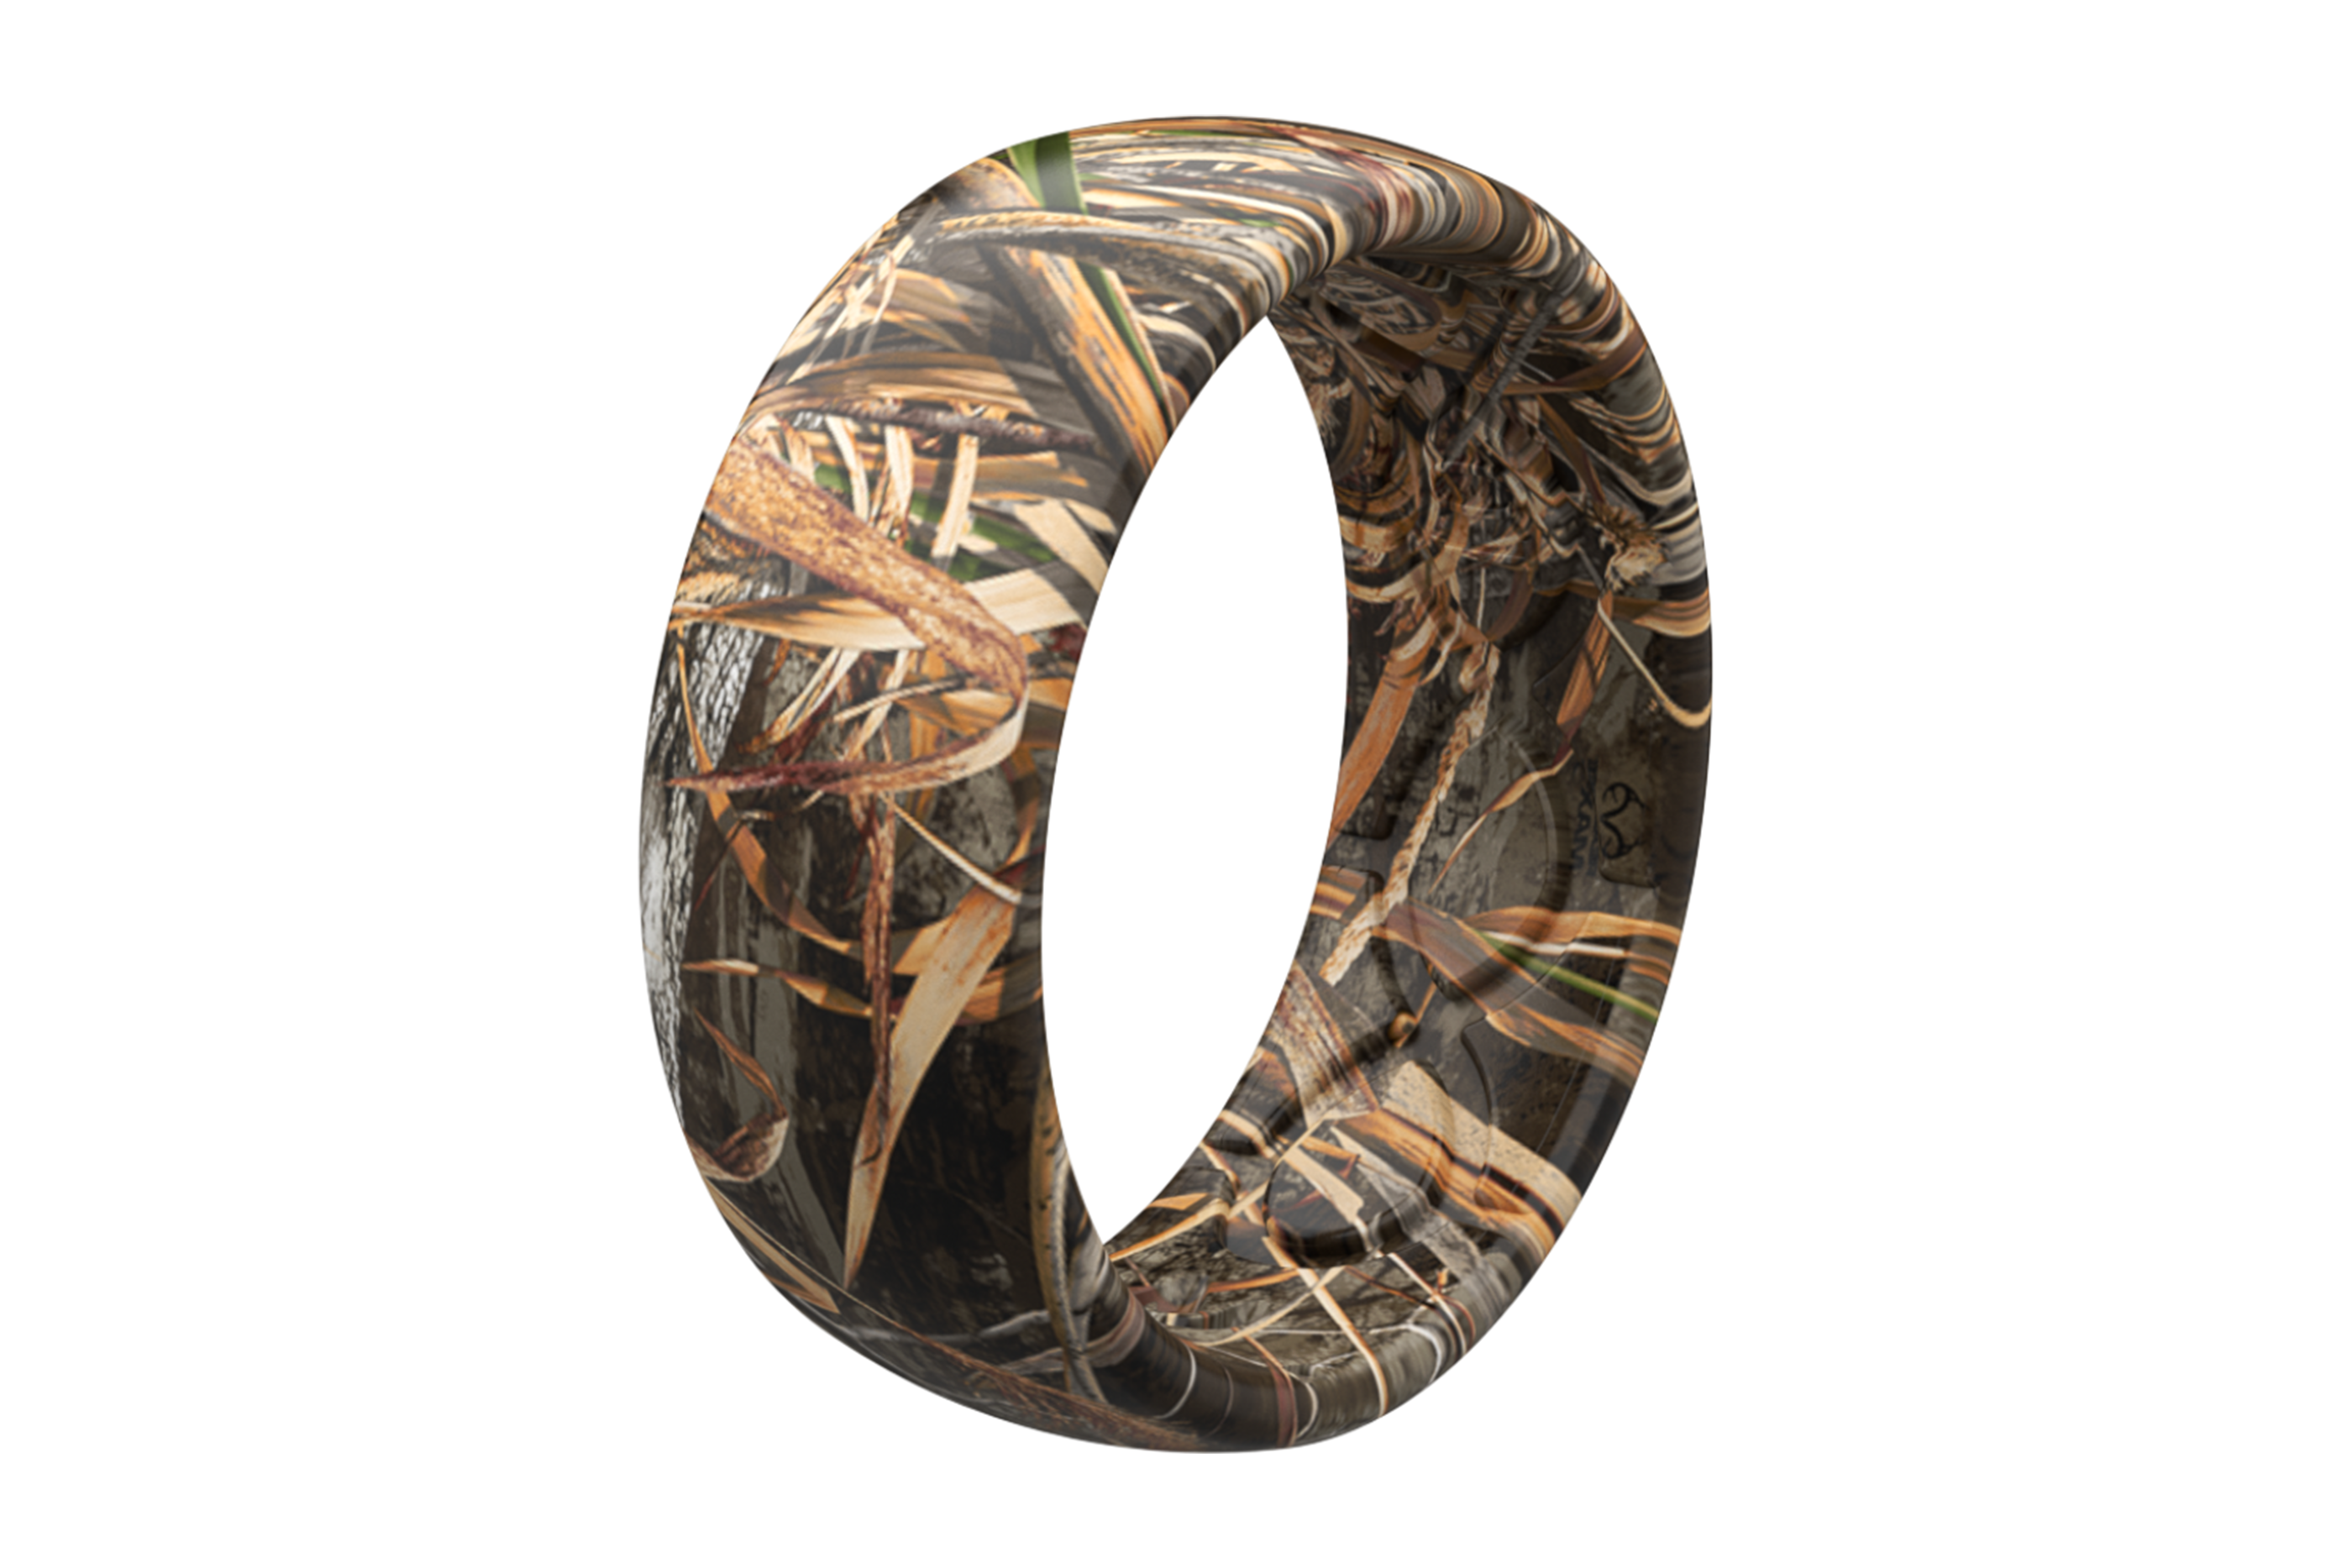 Original Camo Realtree Max 5  viewed on its side  viewed on its side